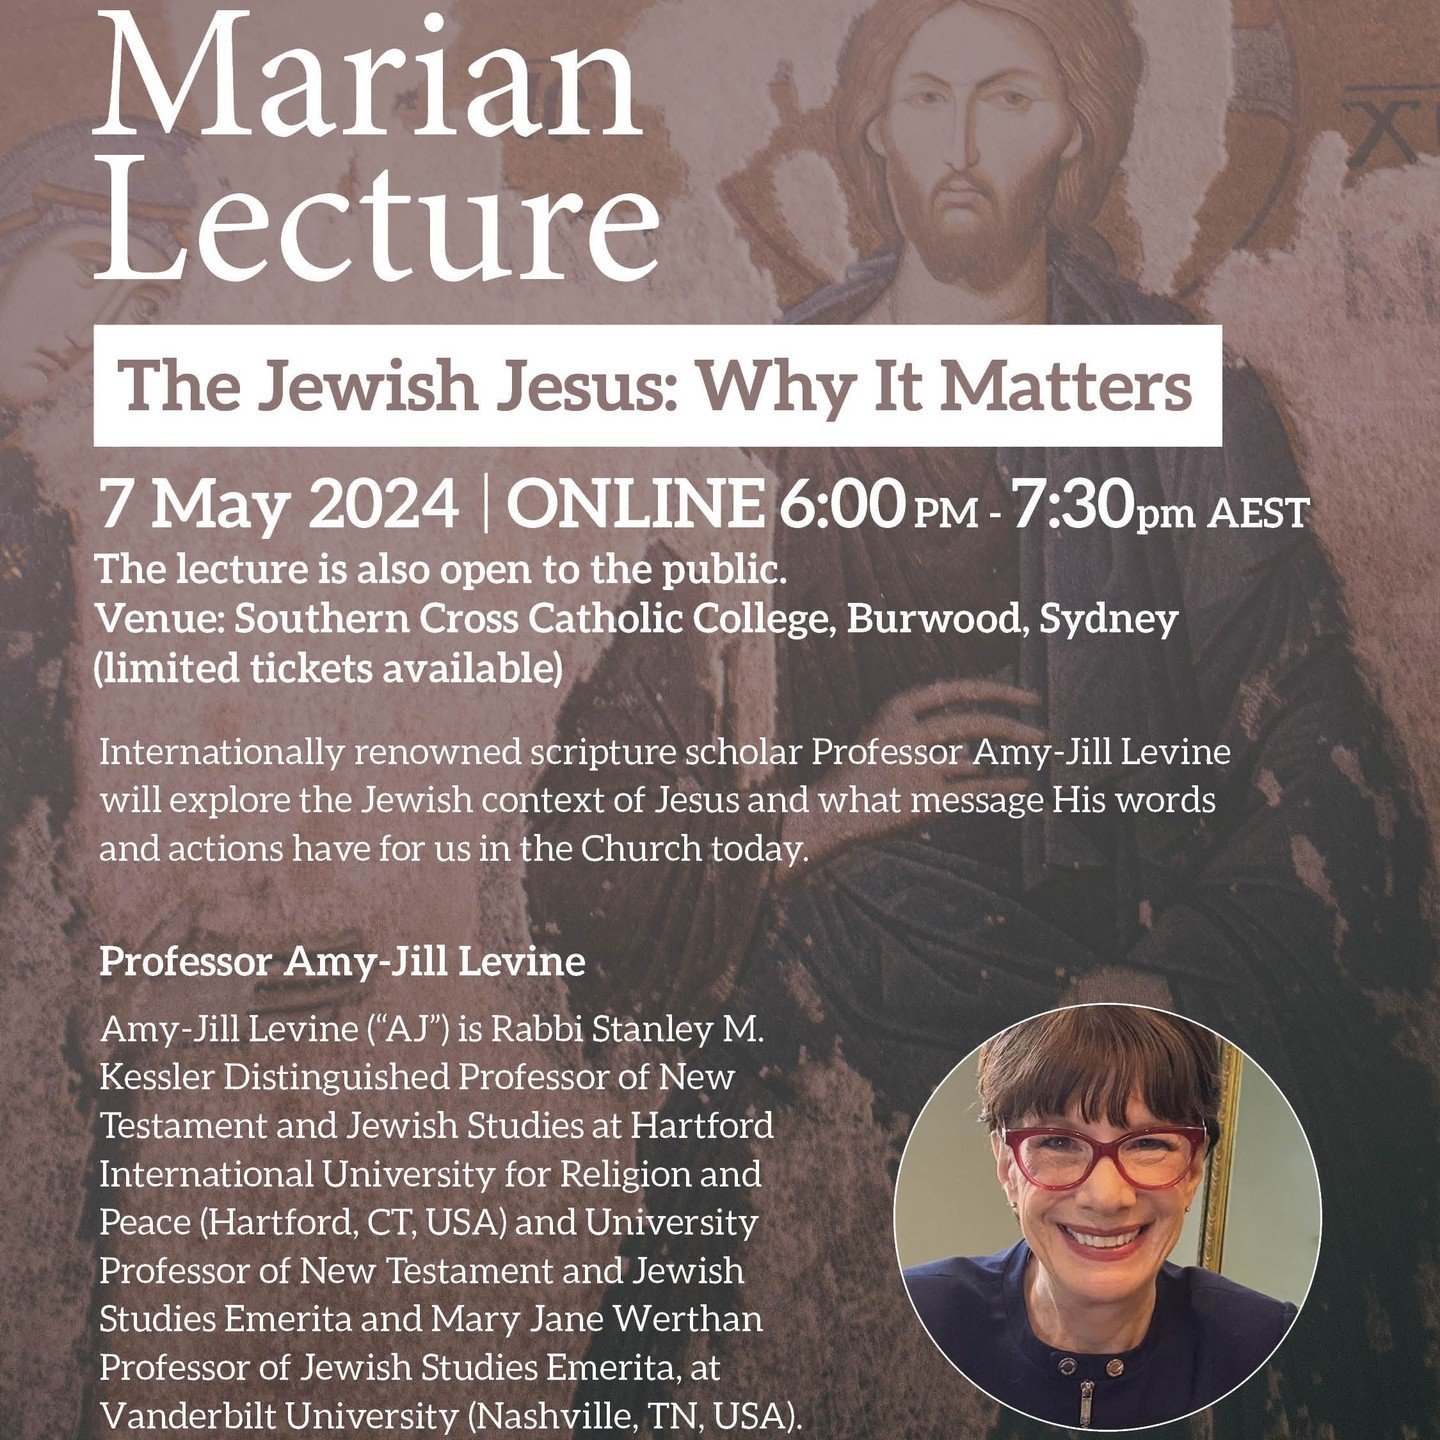 A reminder to all Marists &amp; friends about the 2024 Marian Lecture: Professor Amy-Jill Levine presents 'The Jewish Jesus: Why it Matters'. Next Tuesday 7 May 2024 6:00 PM - 7:30pm AEST. REGISTER HERE https://buff.ly/3T8GfqE See you all there! #wem